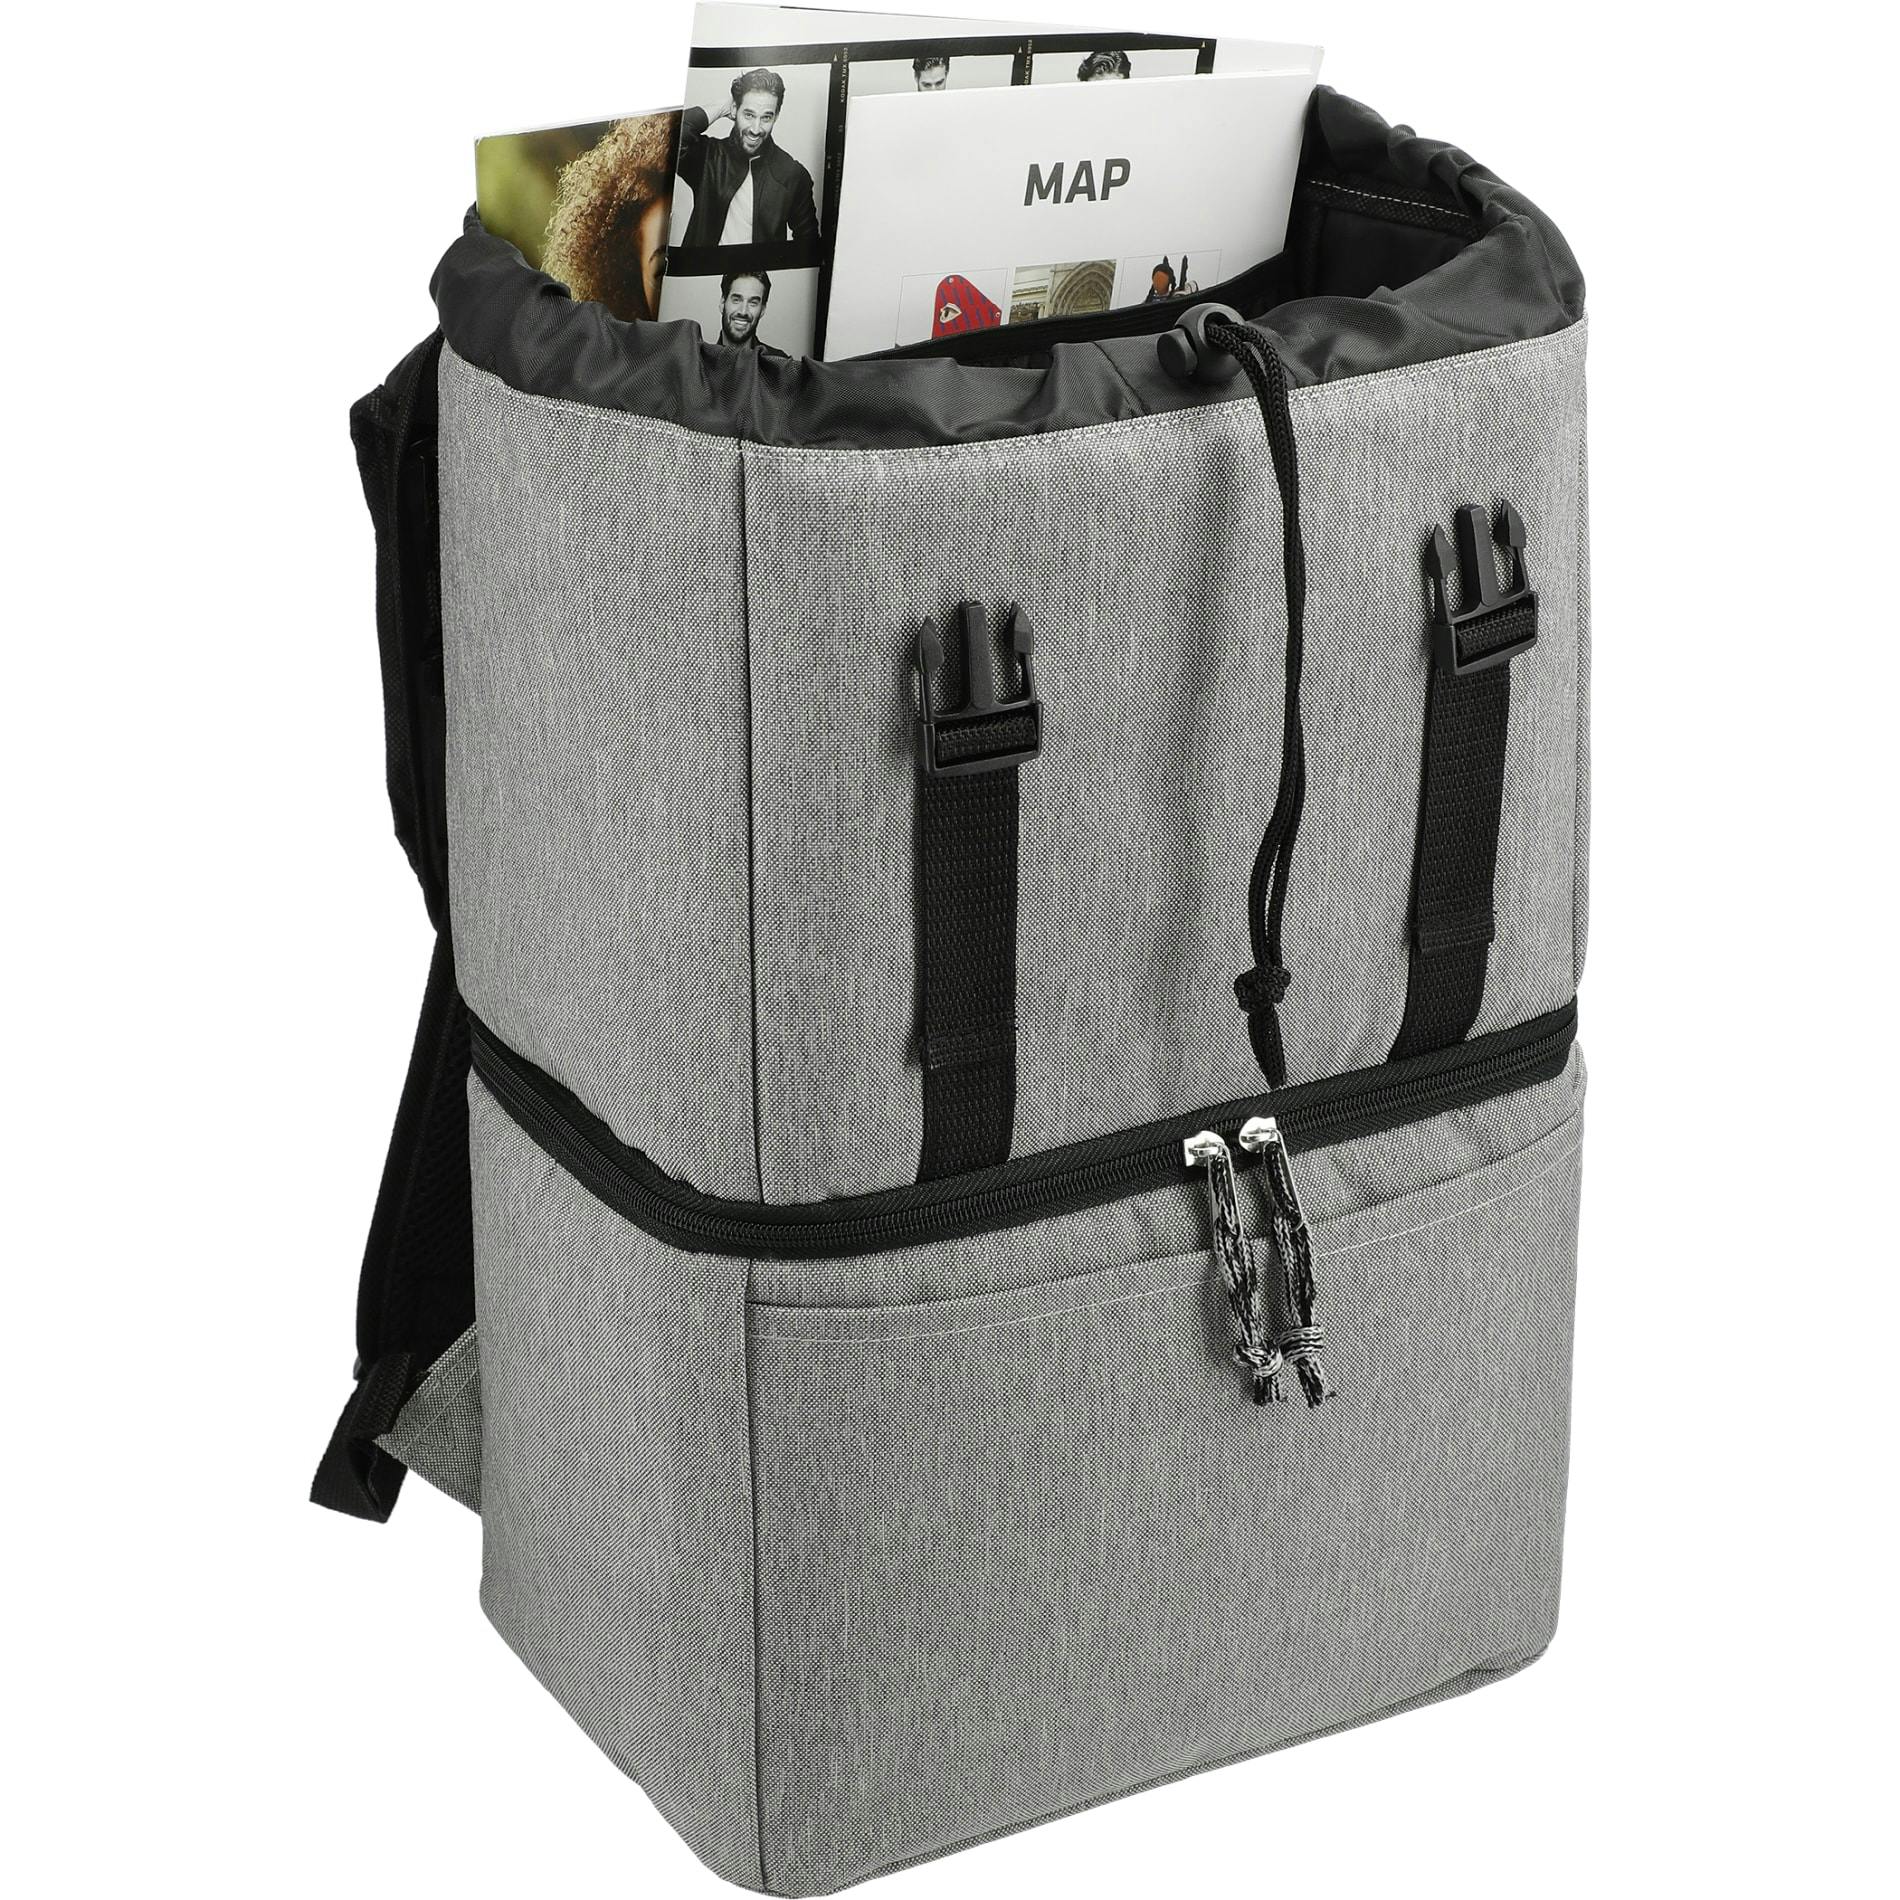 Merchant & Craft Revive Recycled Backpack Cooler - additional Image 4